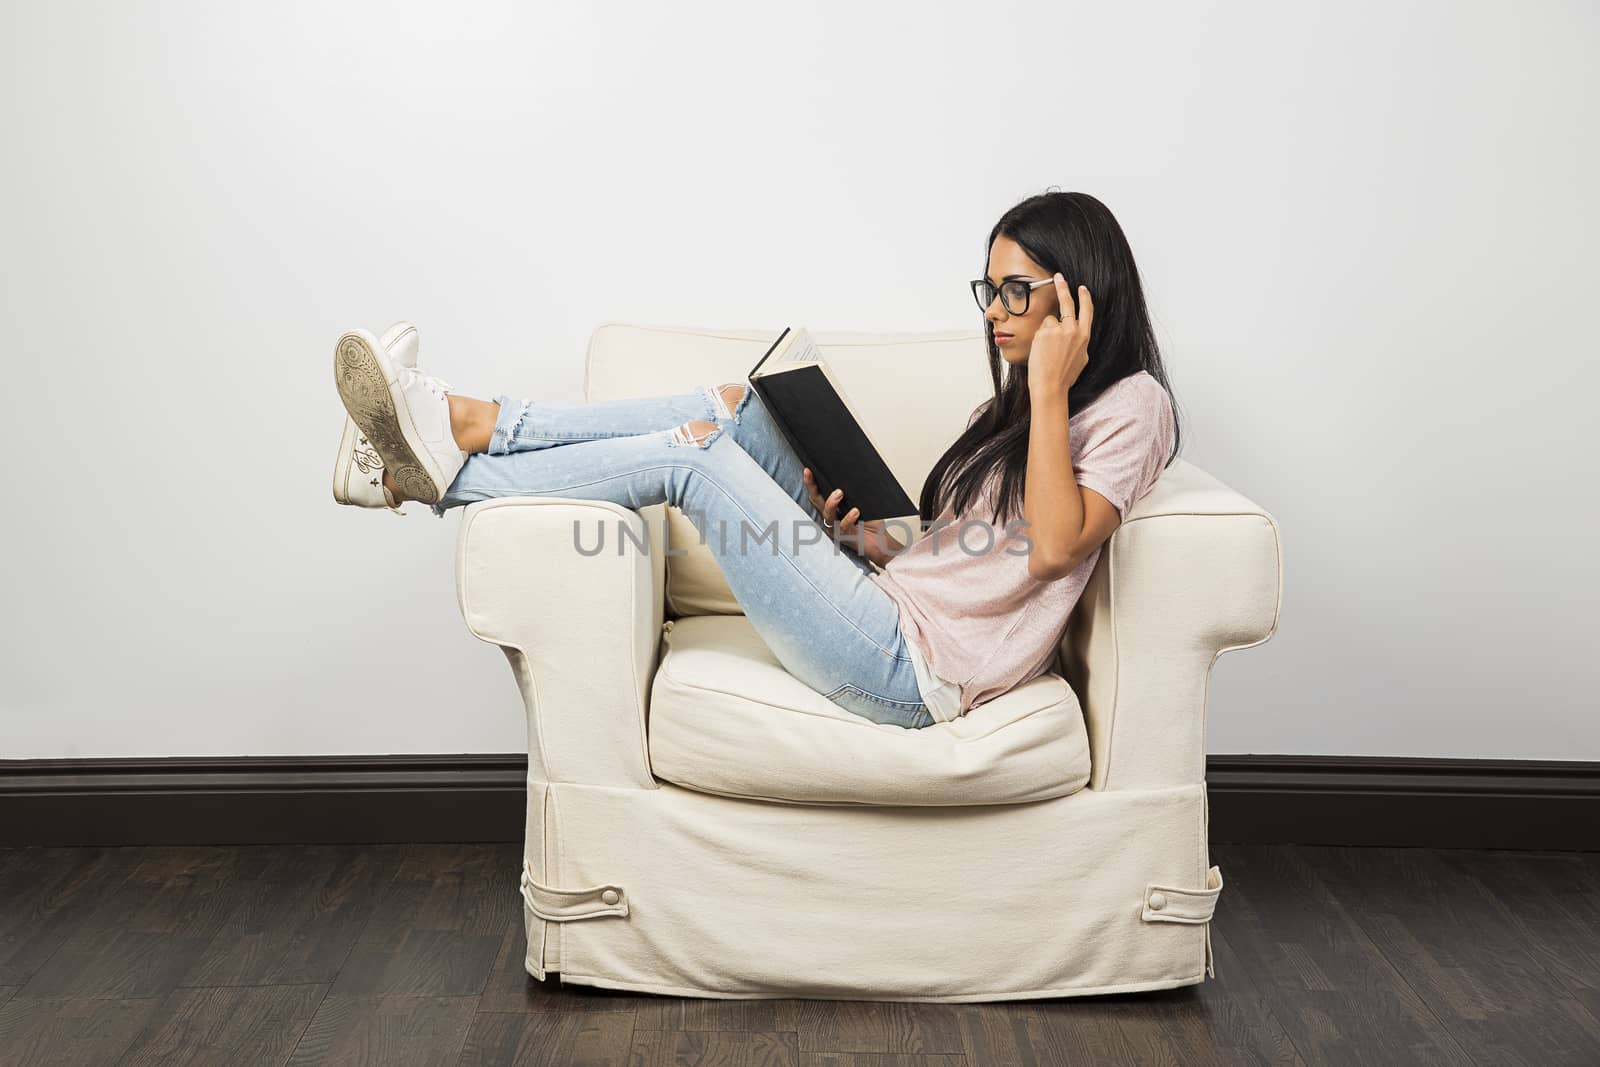 twenty something woman, sitting on a white couch, reading a hard cover book and adjusting her glasses